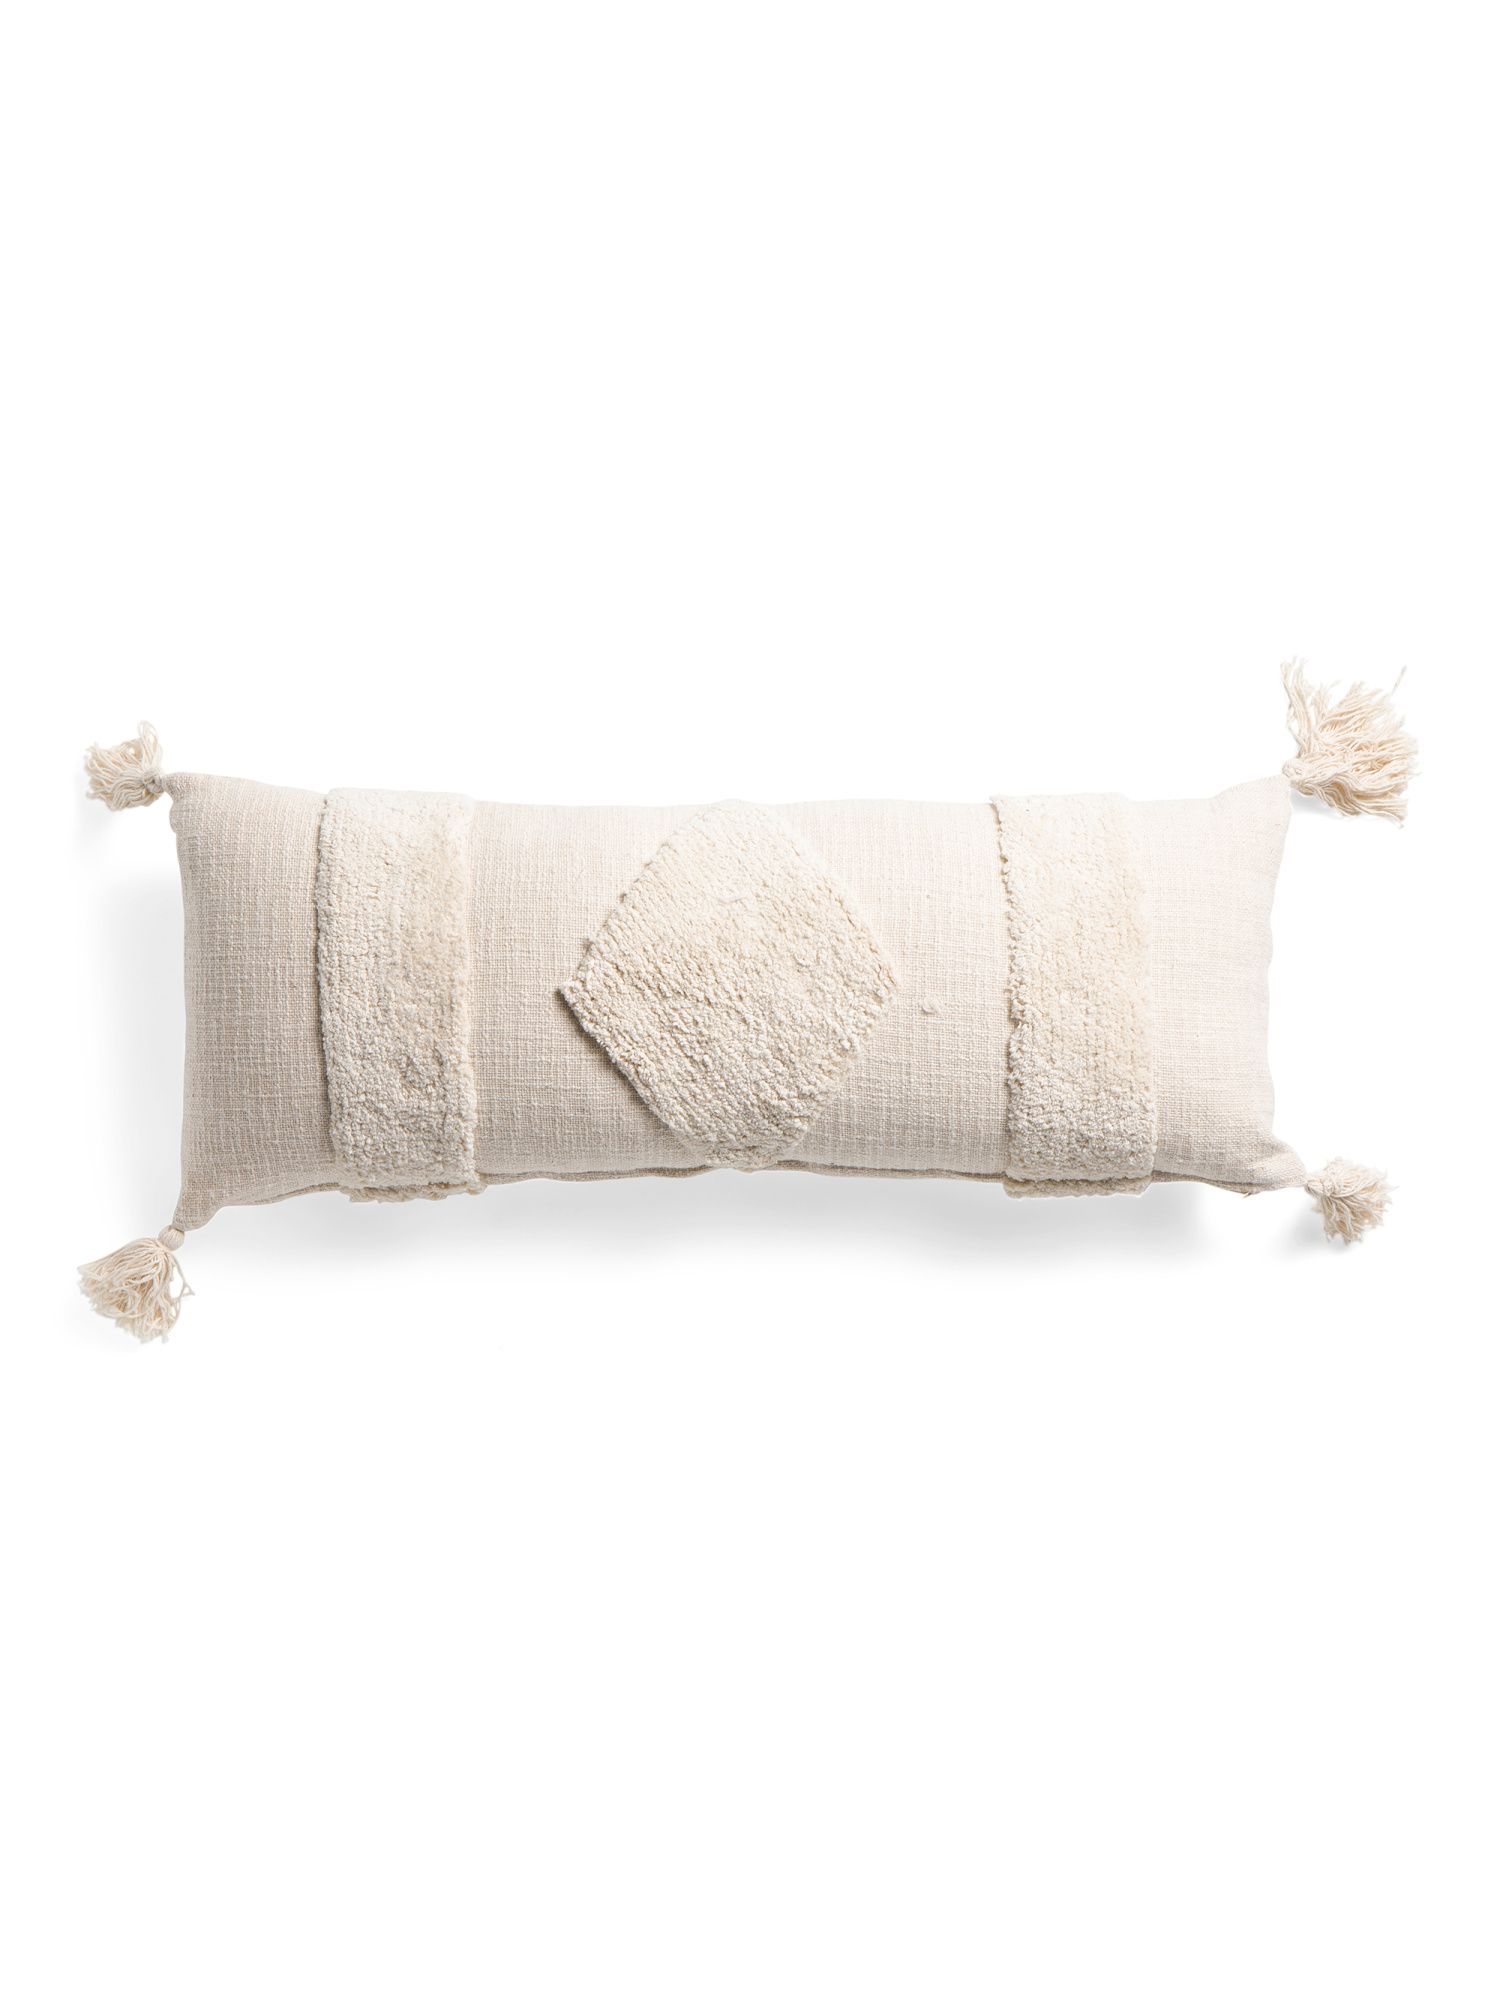 14x34 Natural Pillow With Tufted Diamond Center | Home Essentials | Marshalls | Marshalls